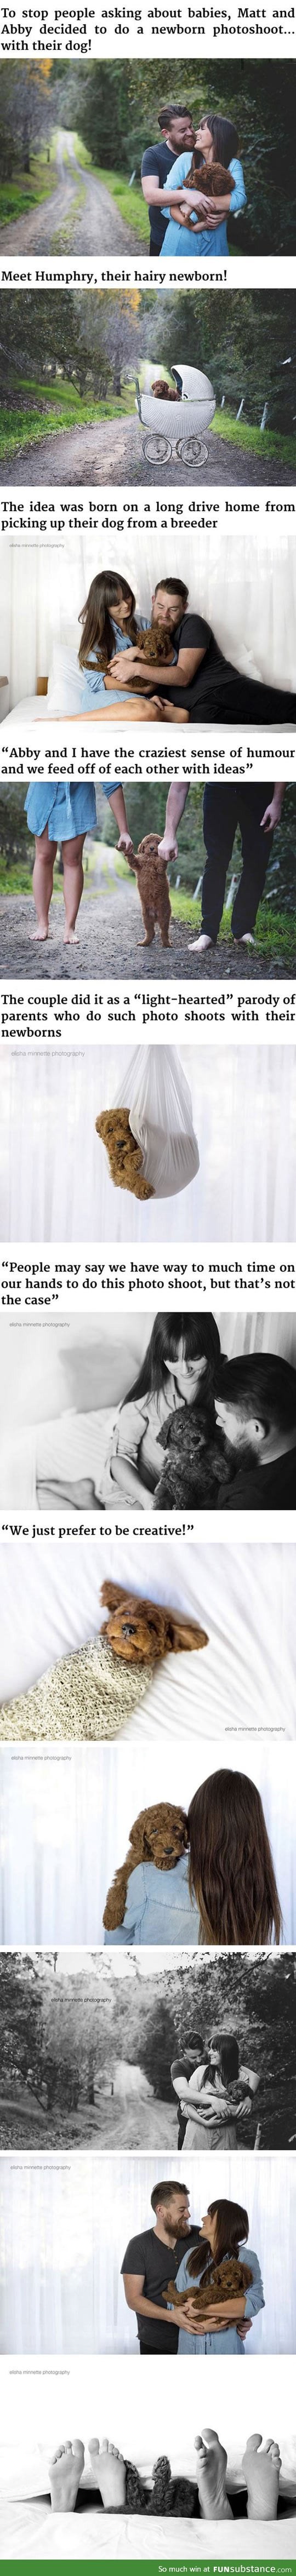 Tired of people asking about babies, they did a newborn photoshoot with... Their dog!